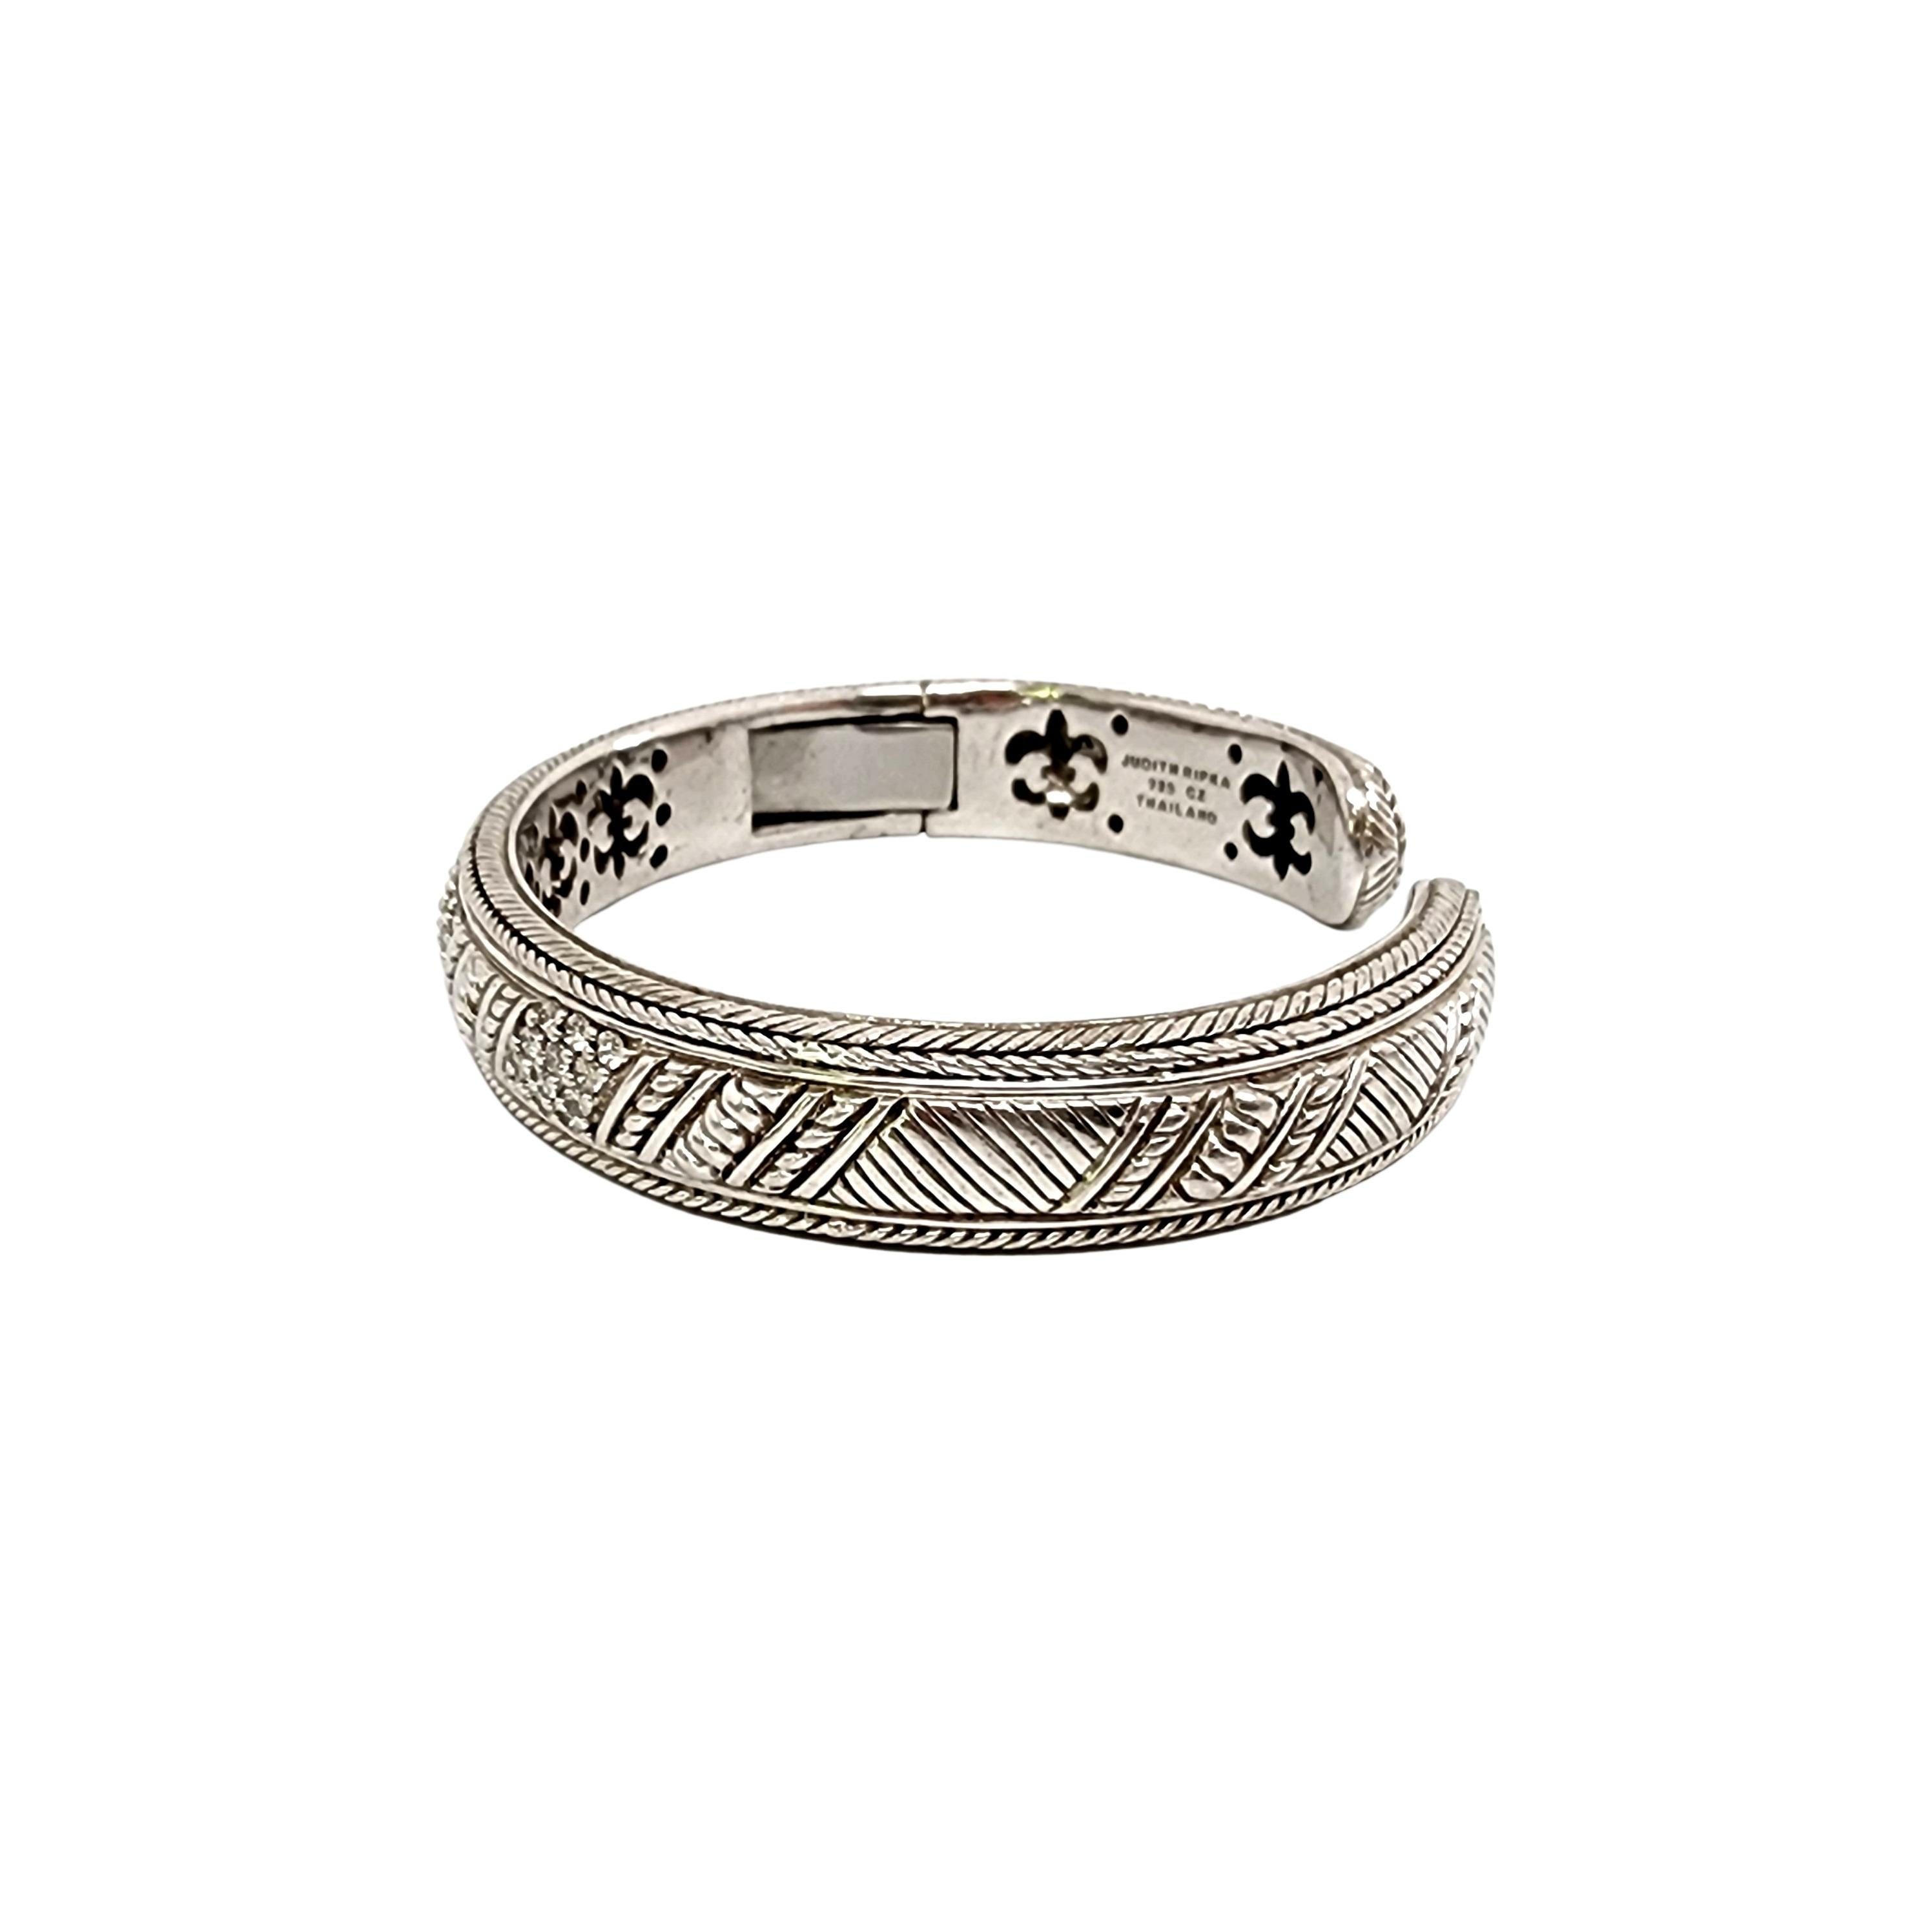 Sterling silver and CZ Diamonique hinged cuff bracelet by Judith Ripka

Designer piece featuring a hinged opening, diagonal row clusters of small round faceted prong-set CZs with textured accents around the cuff.

Measures approx 7 1/4